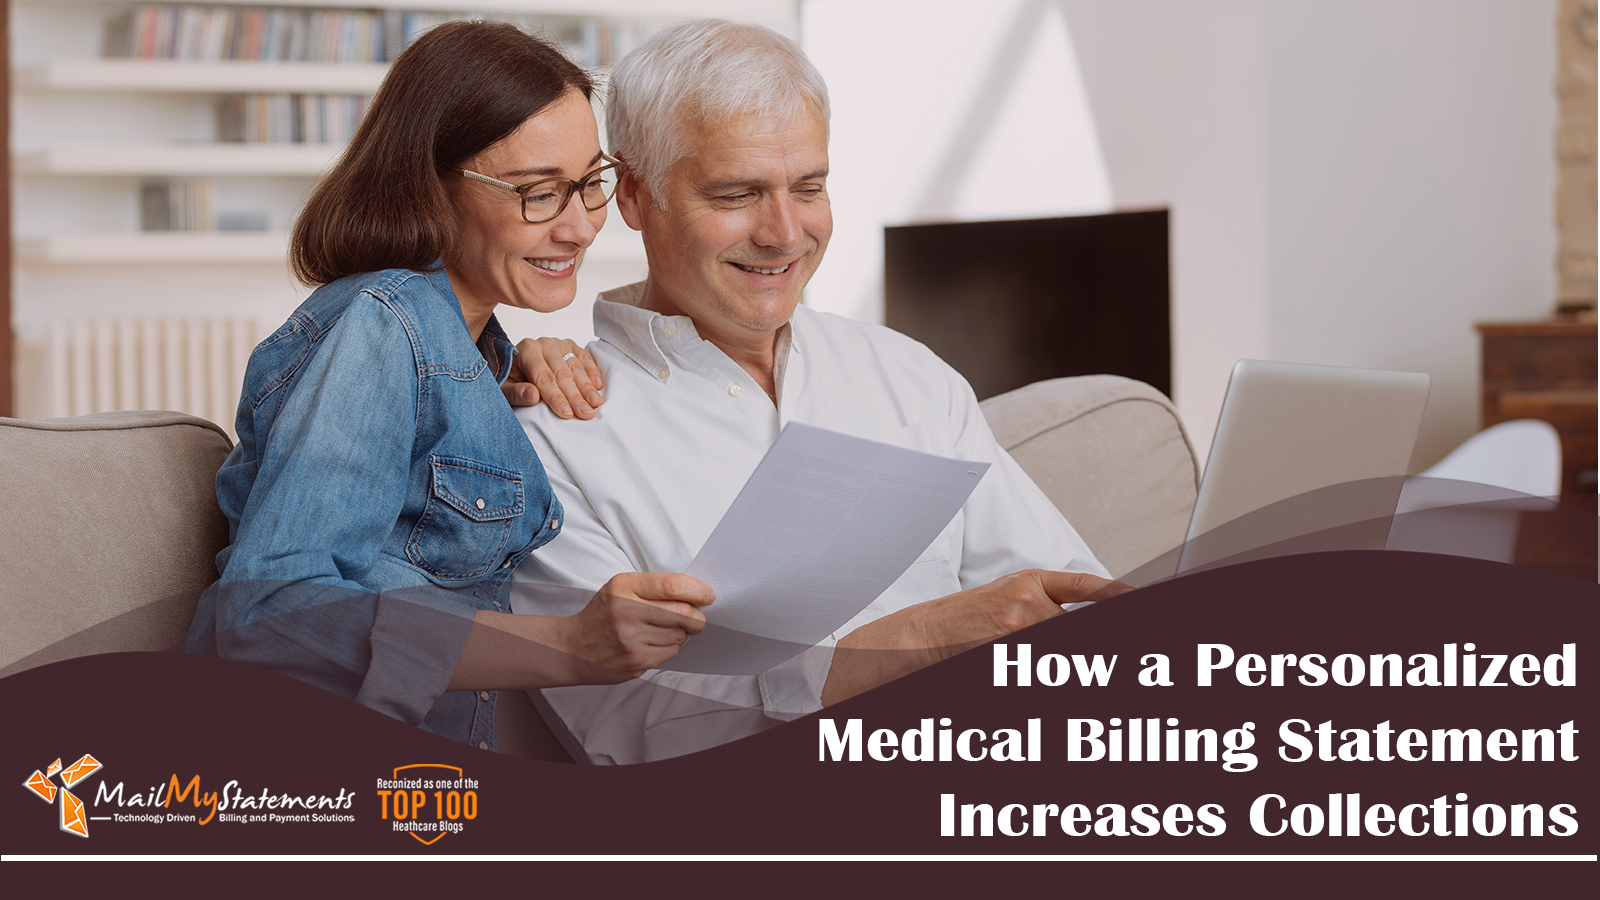 How a Personalized Medical Billing Statement Increases Collections